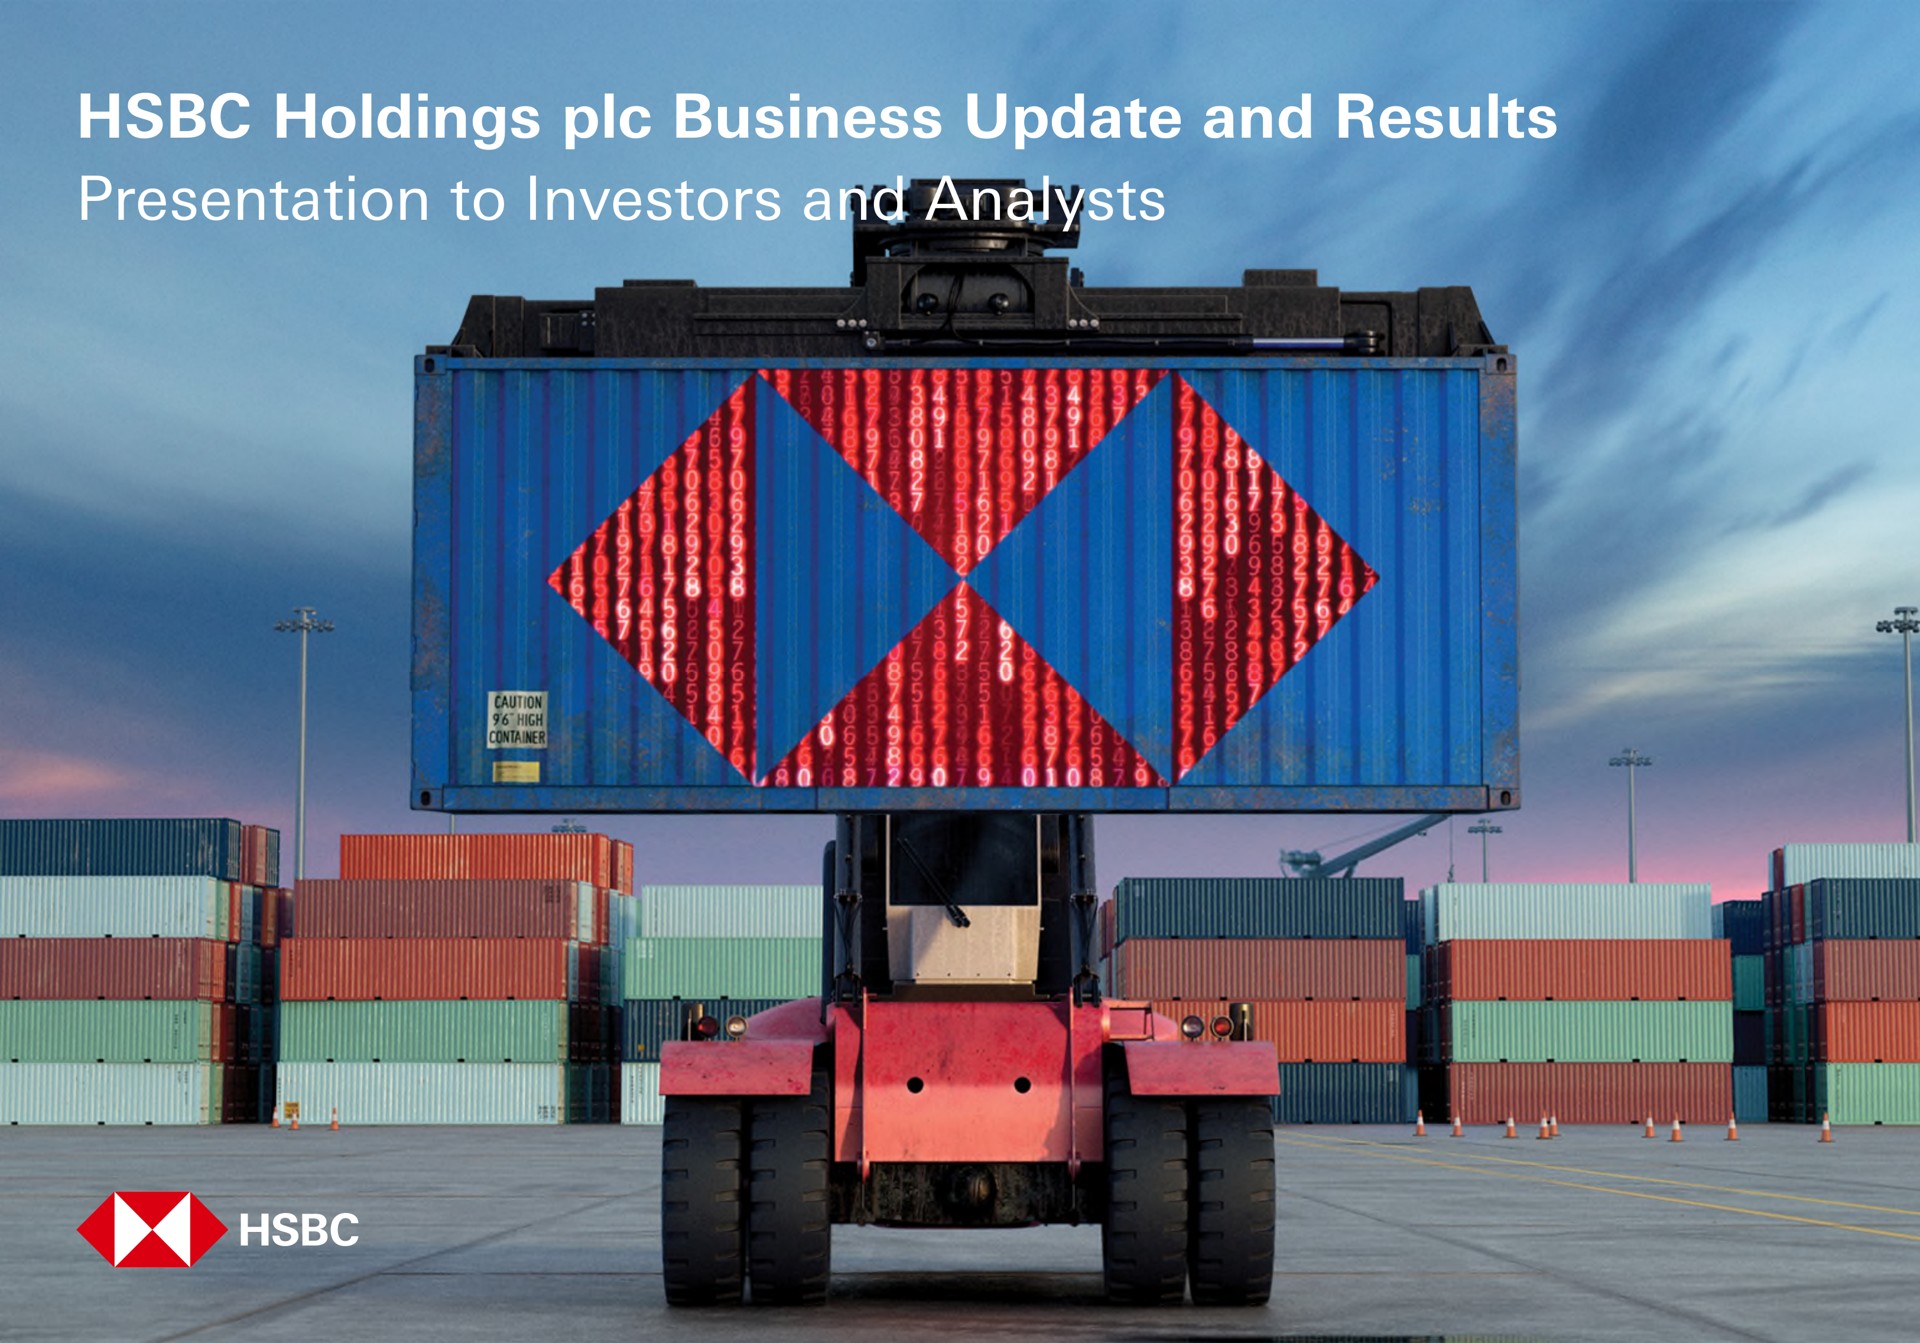 holdings business update and results presentation to investors and analysts in i i a i a i | HSBC